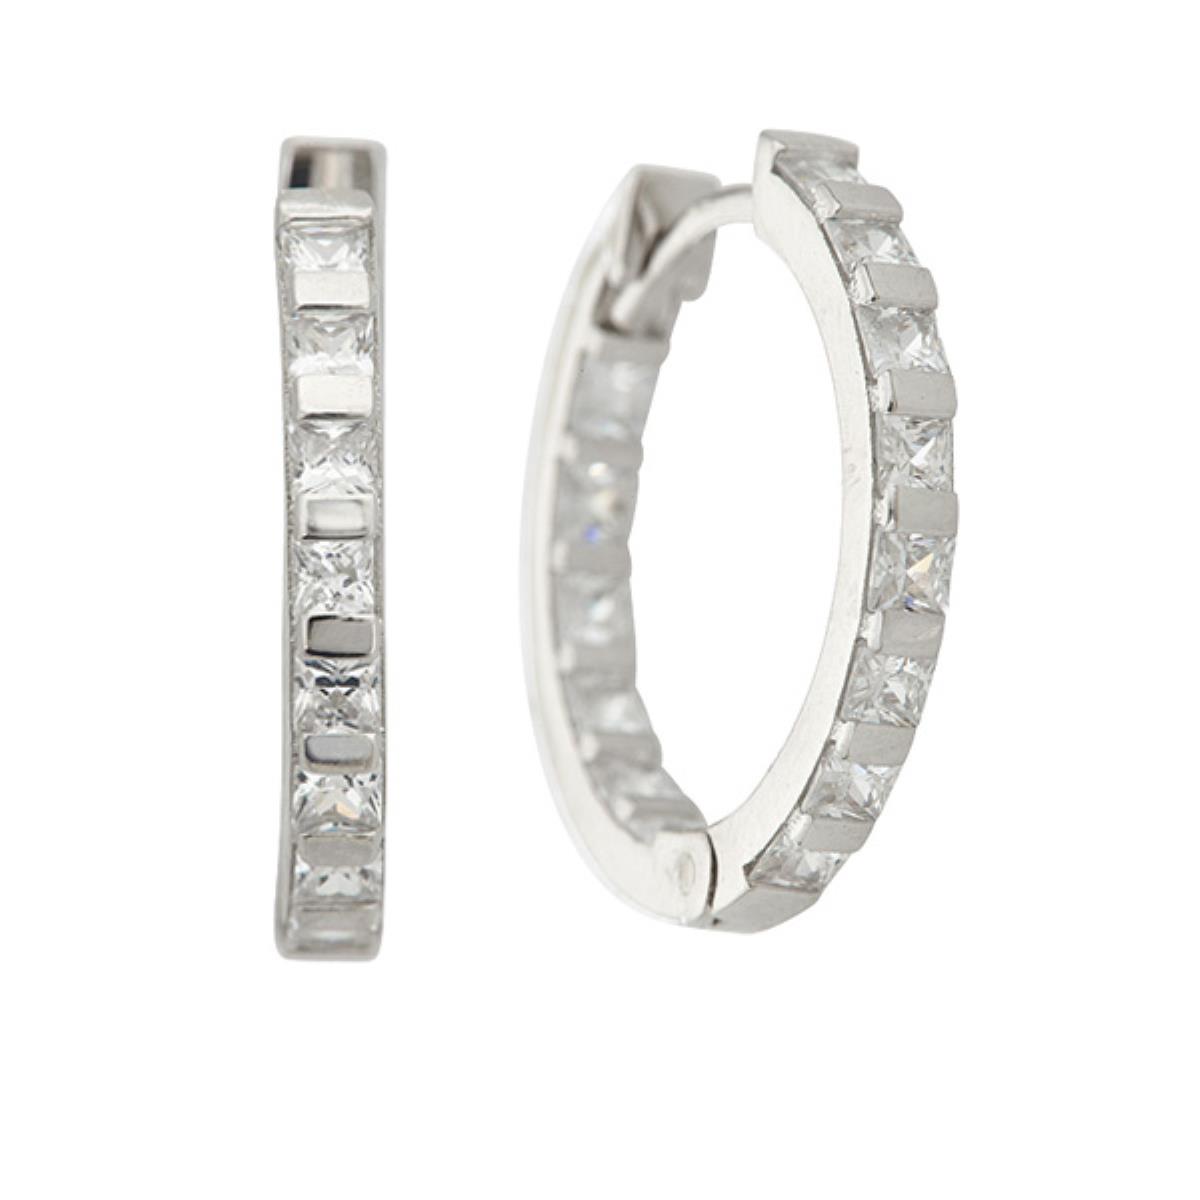 Sterling Silver Princess Cut Inside & Out Hoops